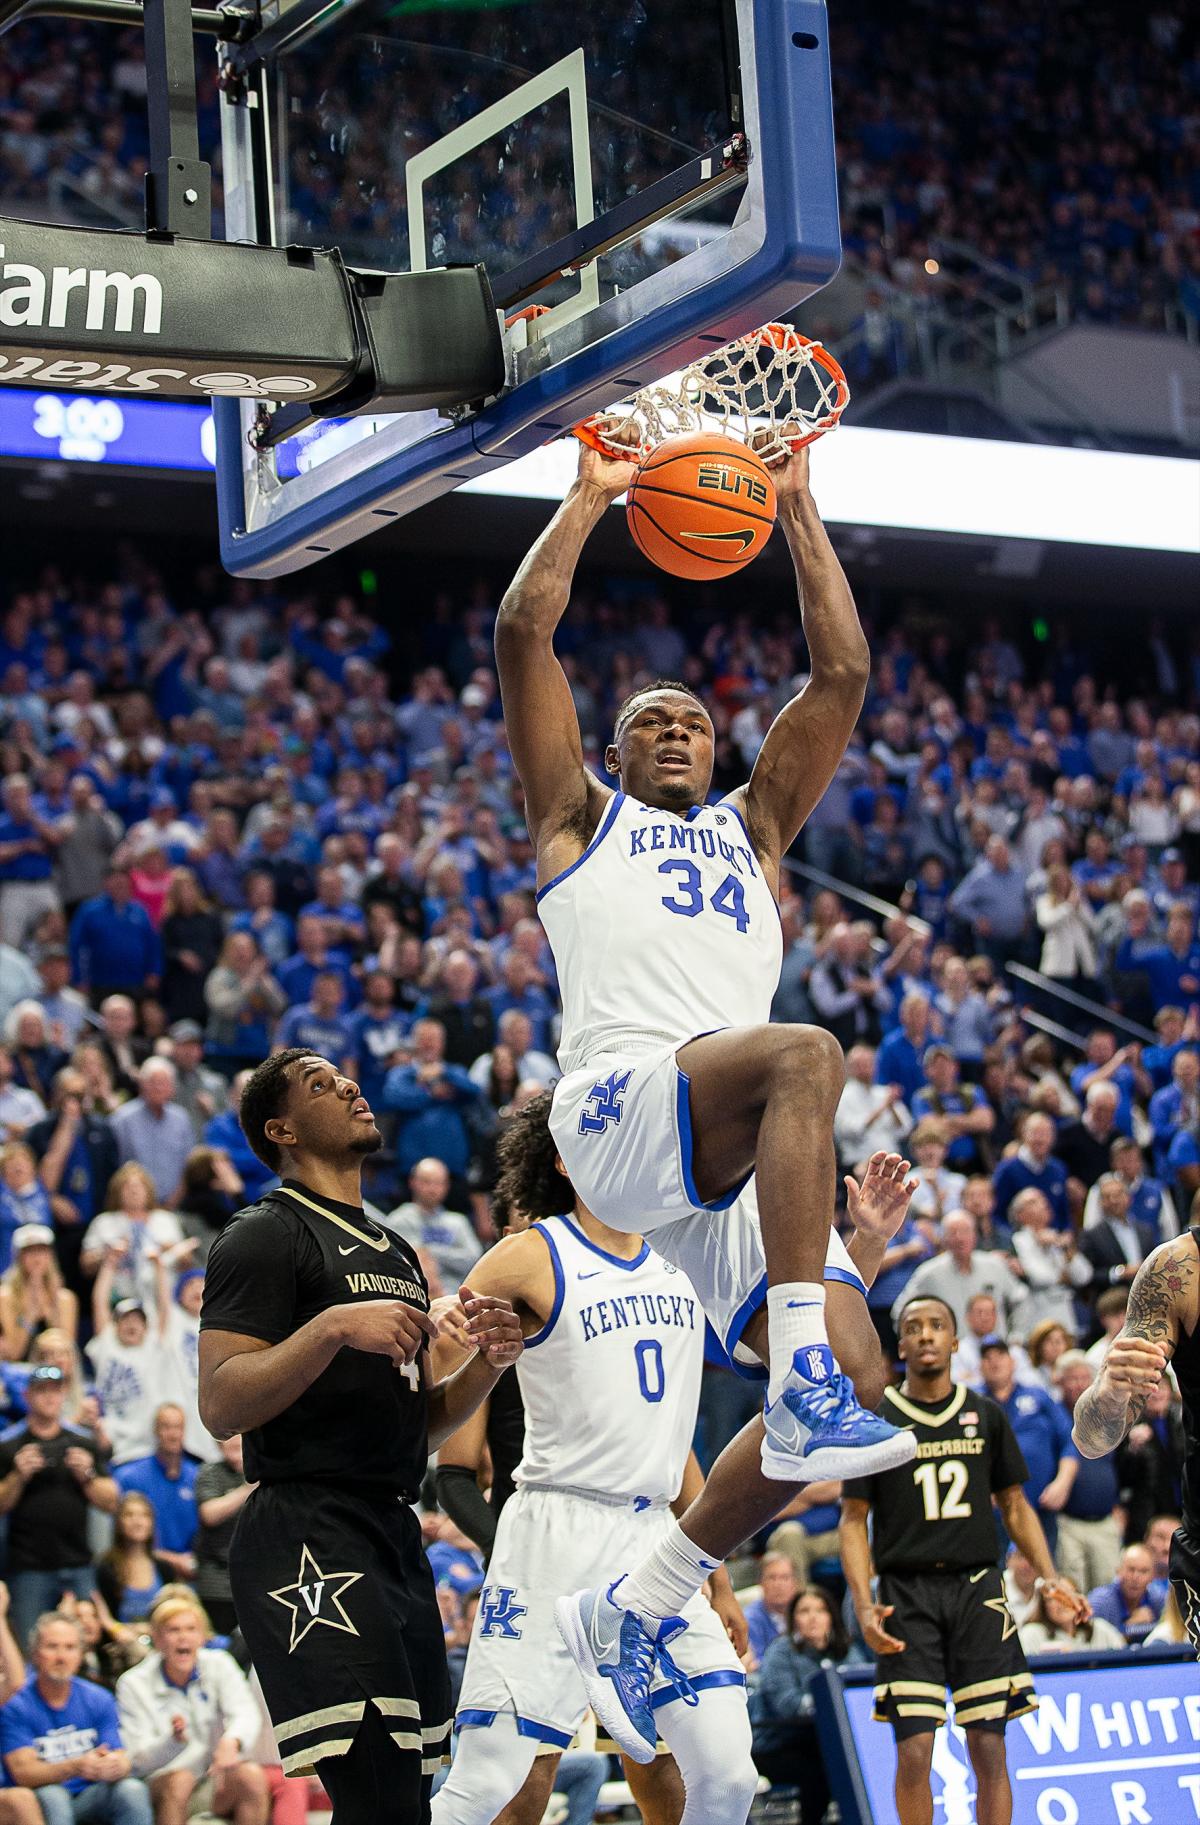 Latest NCAA projections for Kentucky basketball heading into this week